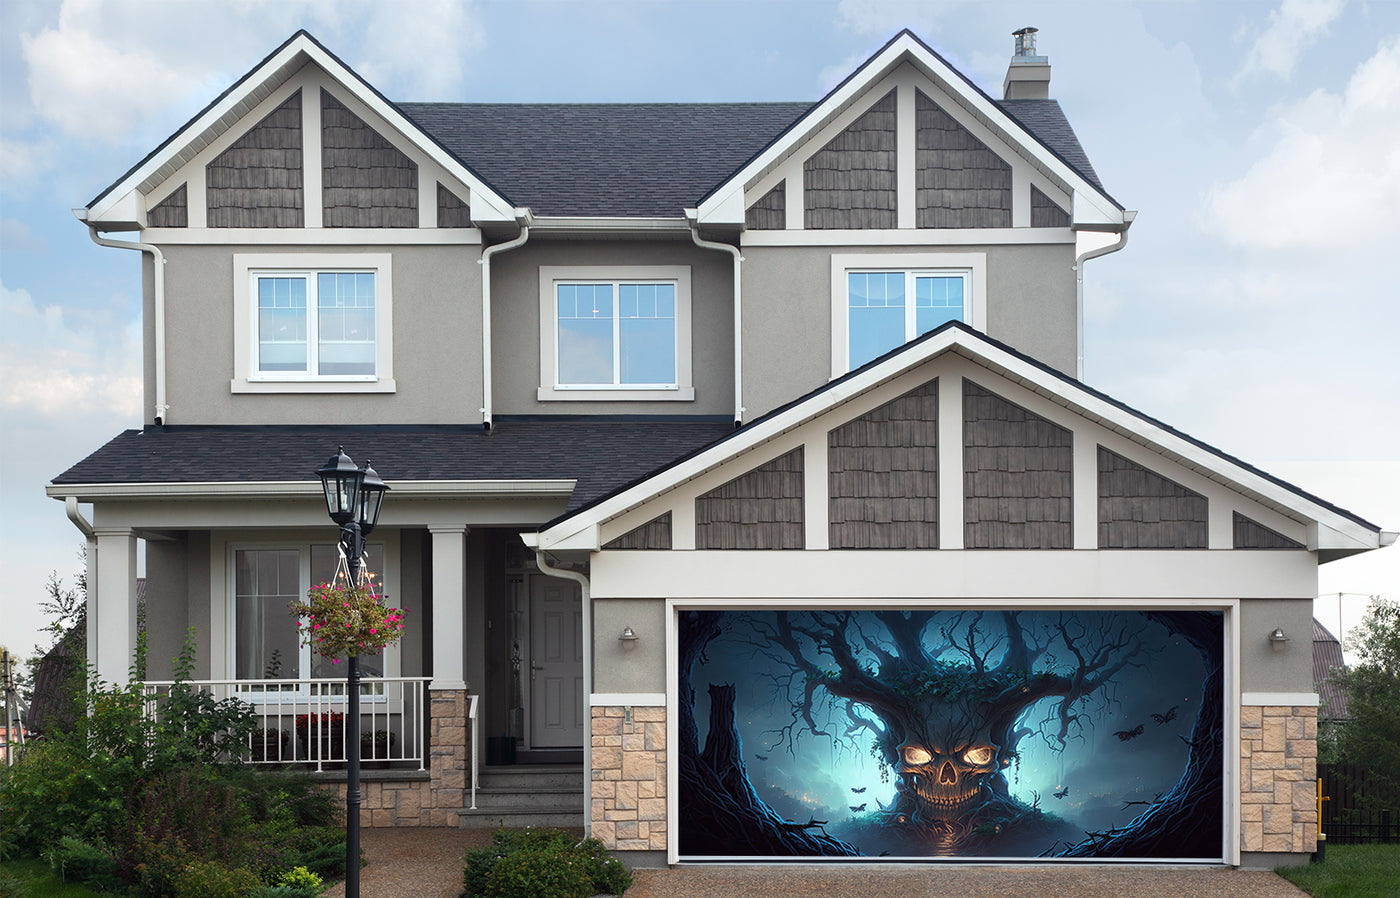 Scary Halloween Skull That Is Also a Tree Garage Door Cover